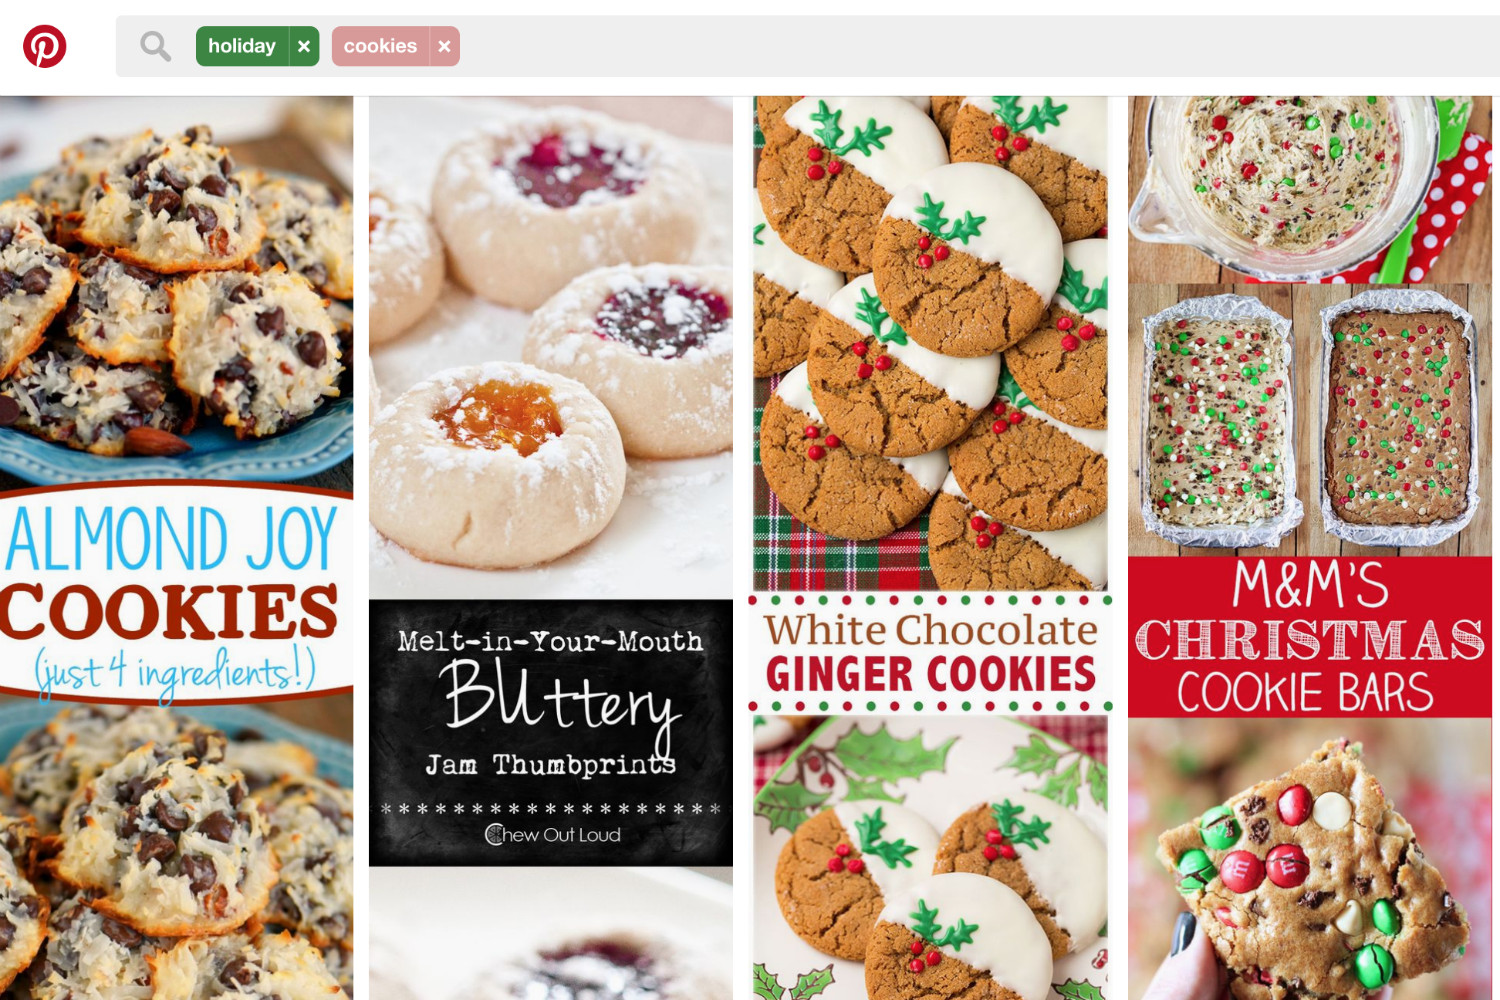 Most Popular Christmas Cookies
 What is Pinterest’s most popular Christmas cookie recipe